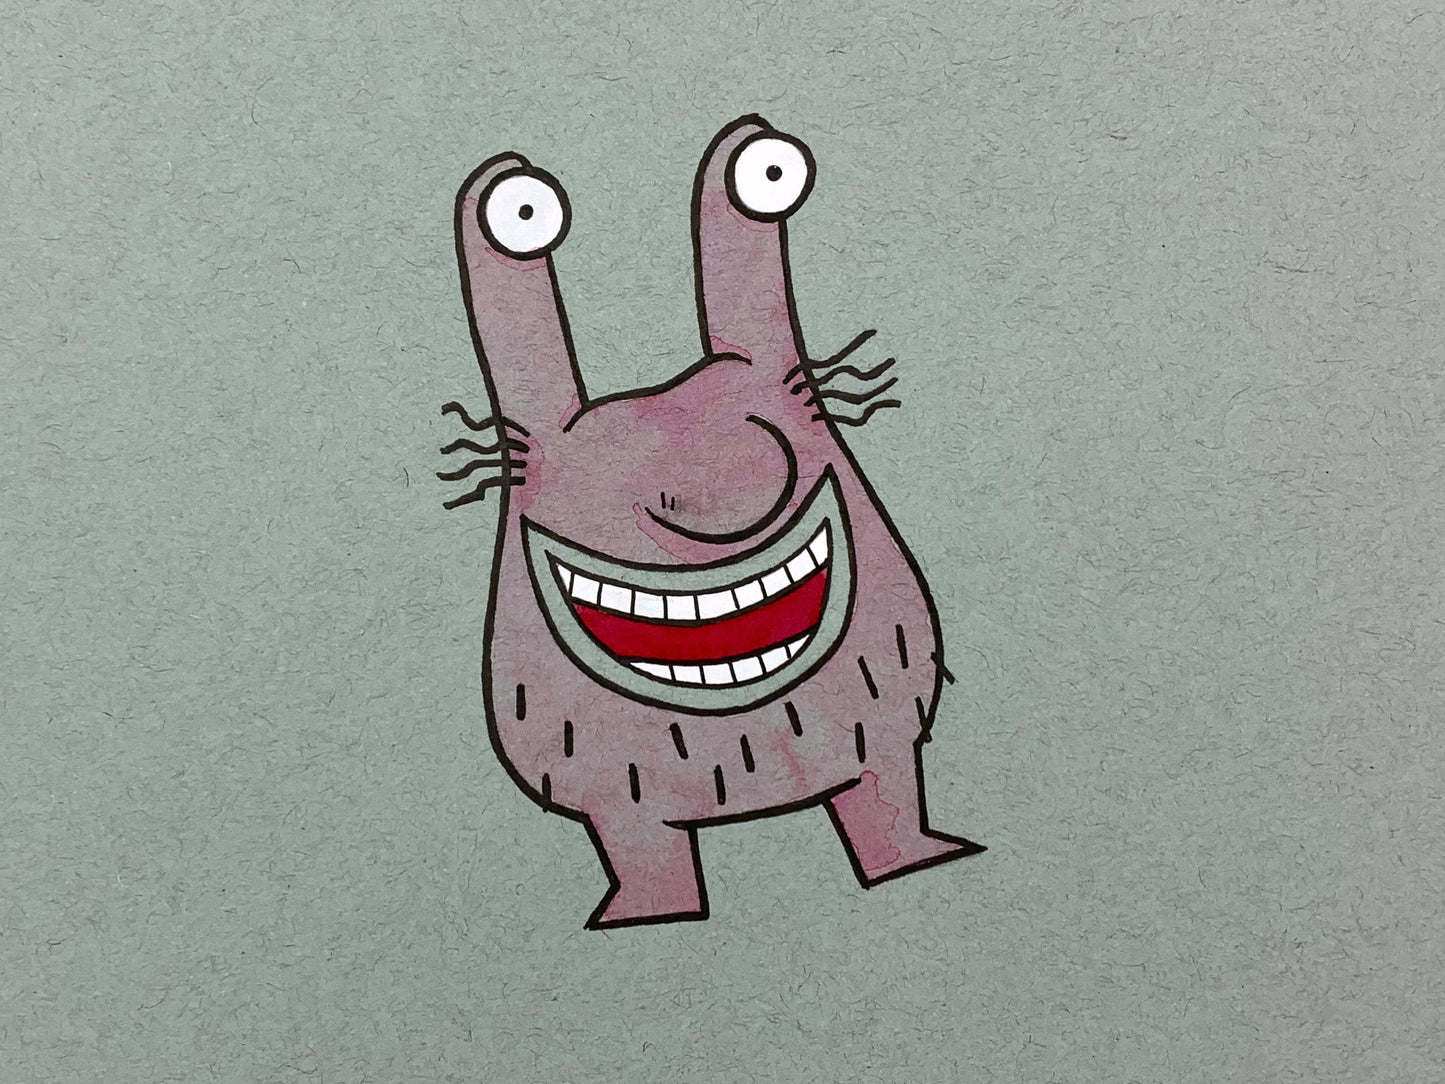 Illustration fan art of Krumm from Aaahh!!! Real Monsters” holding his eyes above his head. Made using ink, watercolor, and gouache.